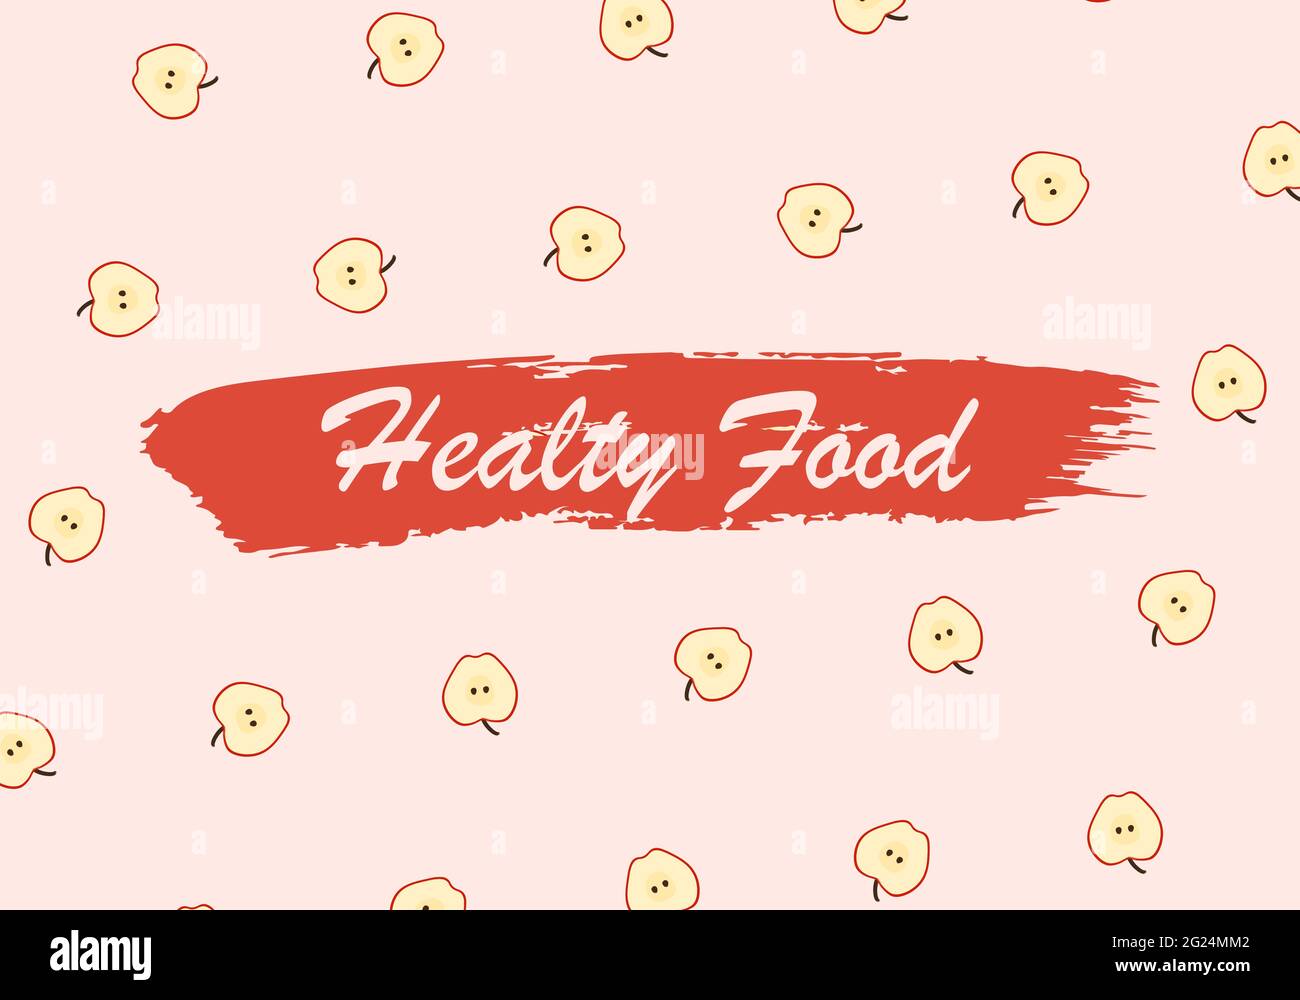 Healthy food typography background with apple slices pattern. Vector illustration. Abstract background. Stock Vector